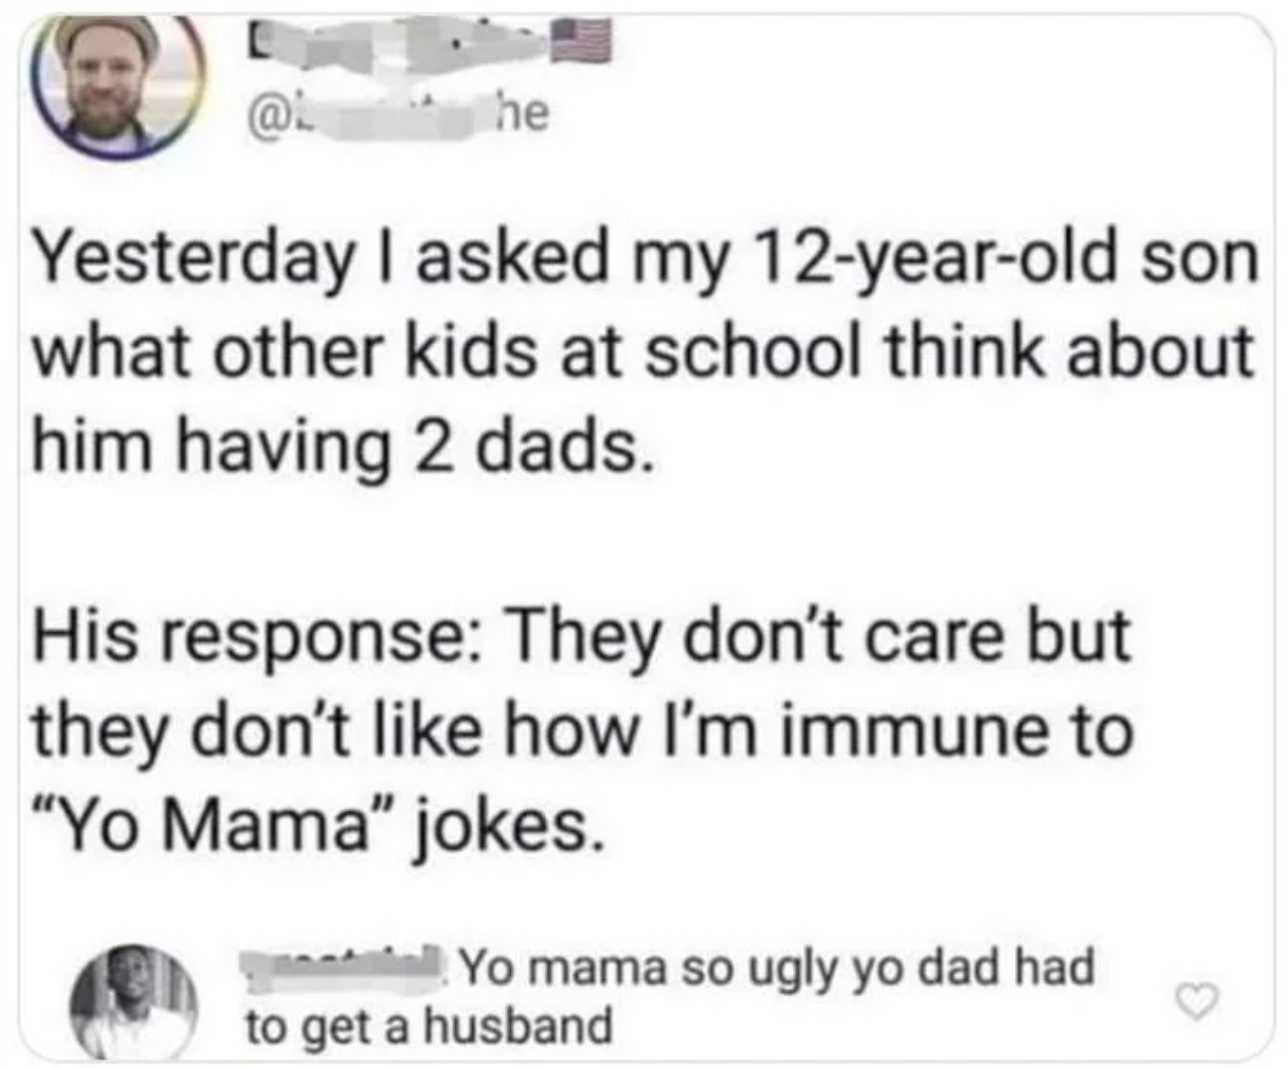 screenshot - he Yesterday I asked my 12yearold son what other kids at school think about him having 2 dads. His response They don't care but they don't how I'm immune to "Yo Mama" jokes. Yo mama so ugly yo dad had to get a husband